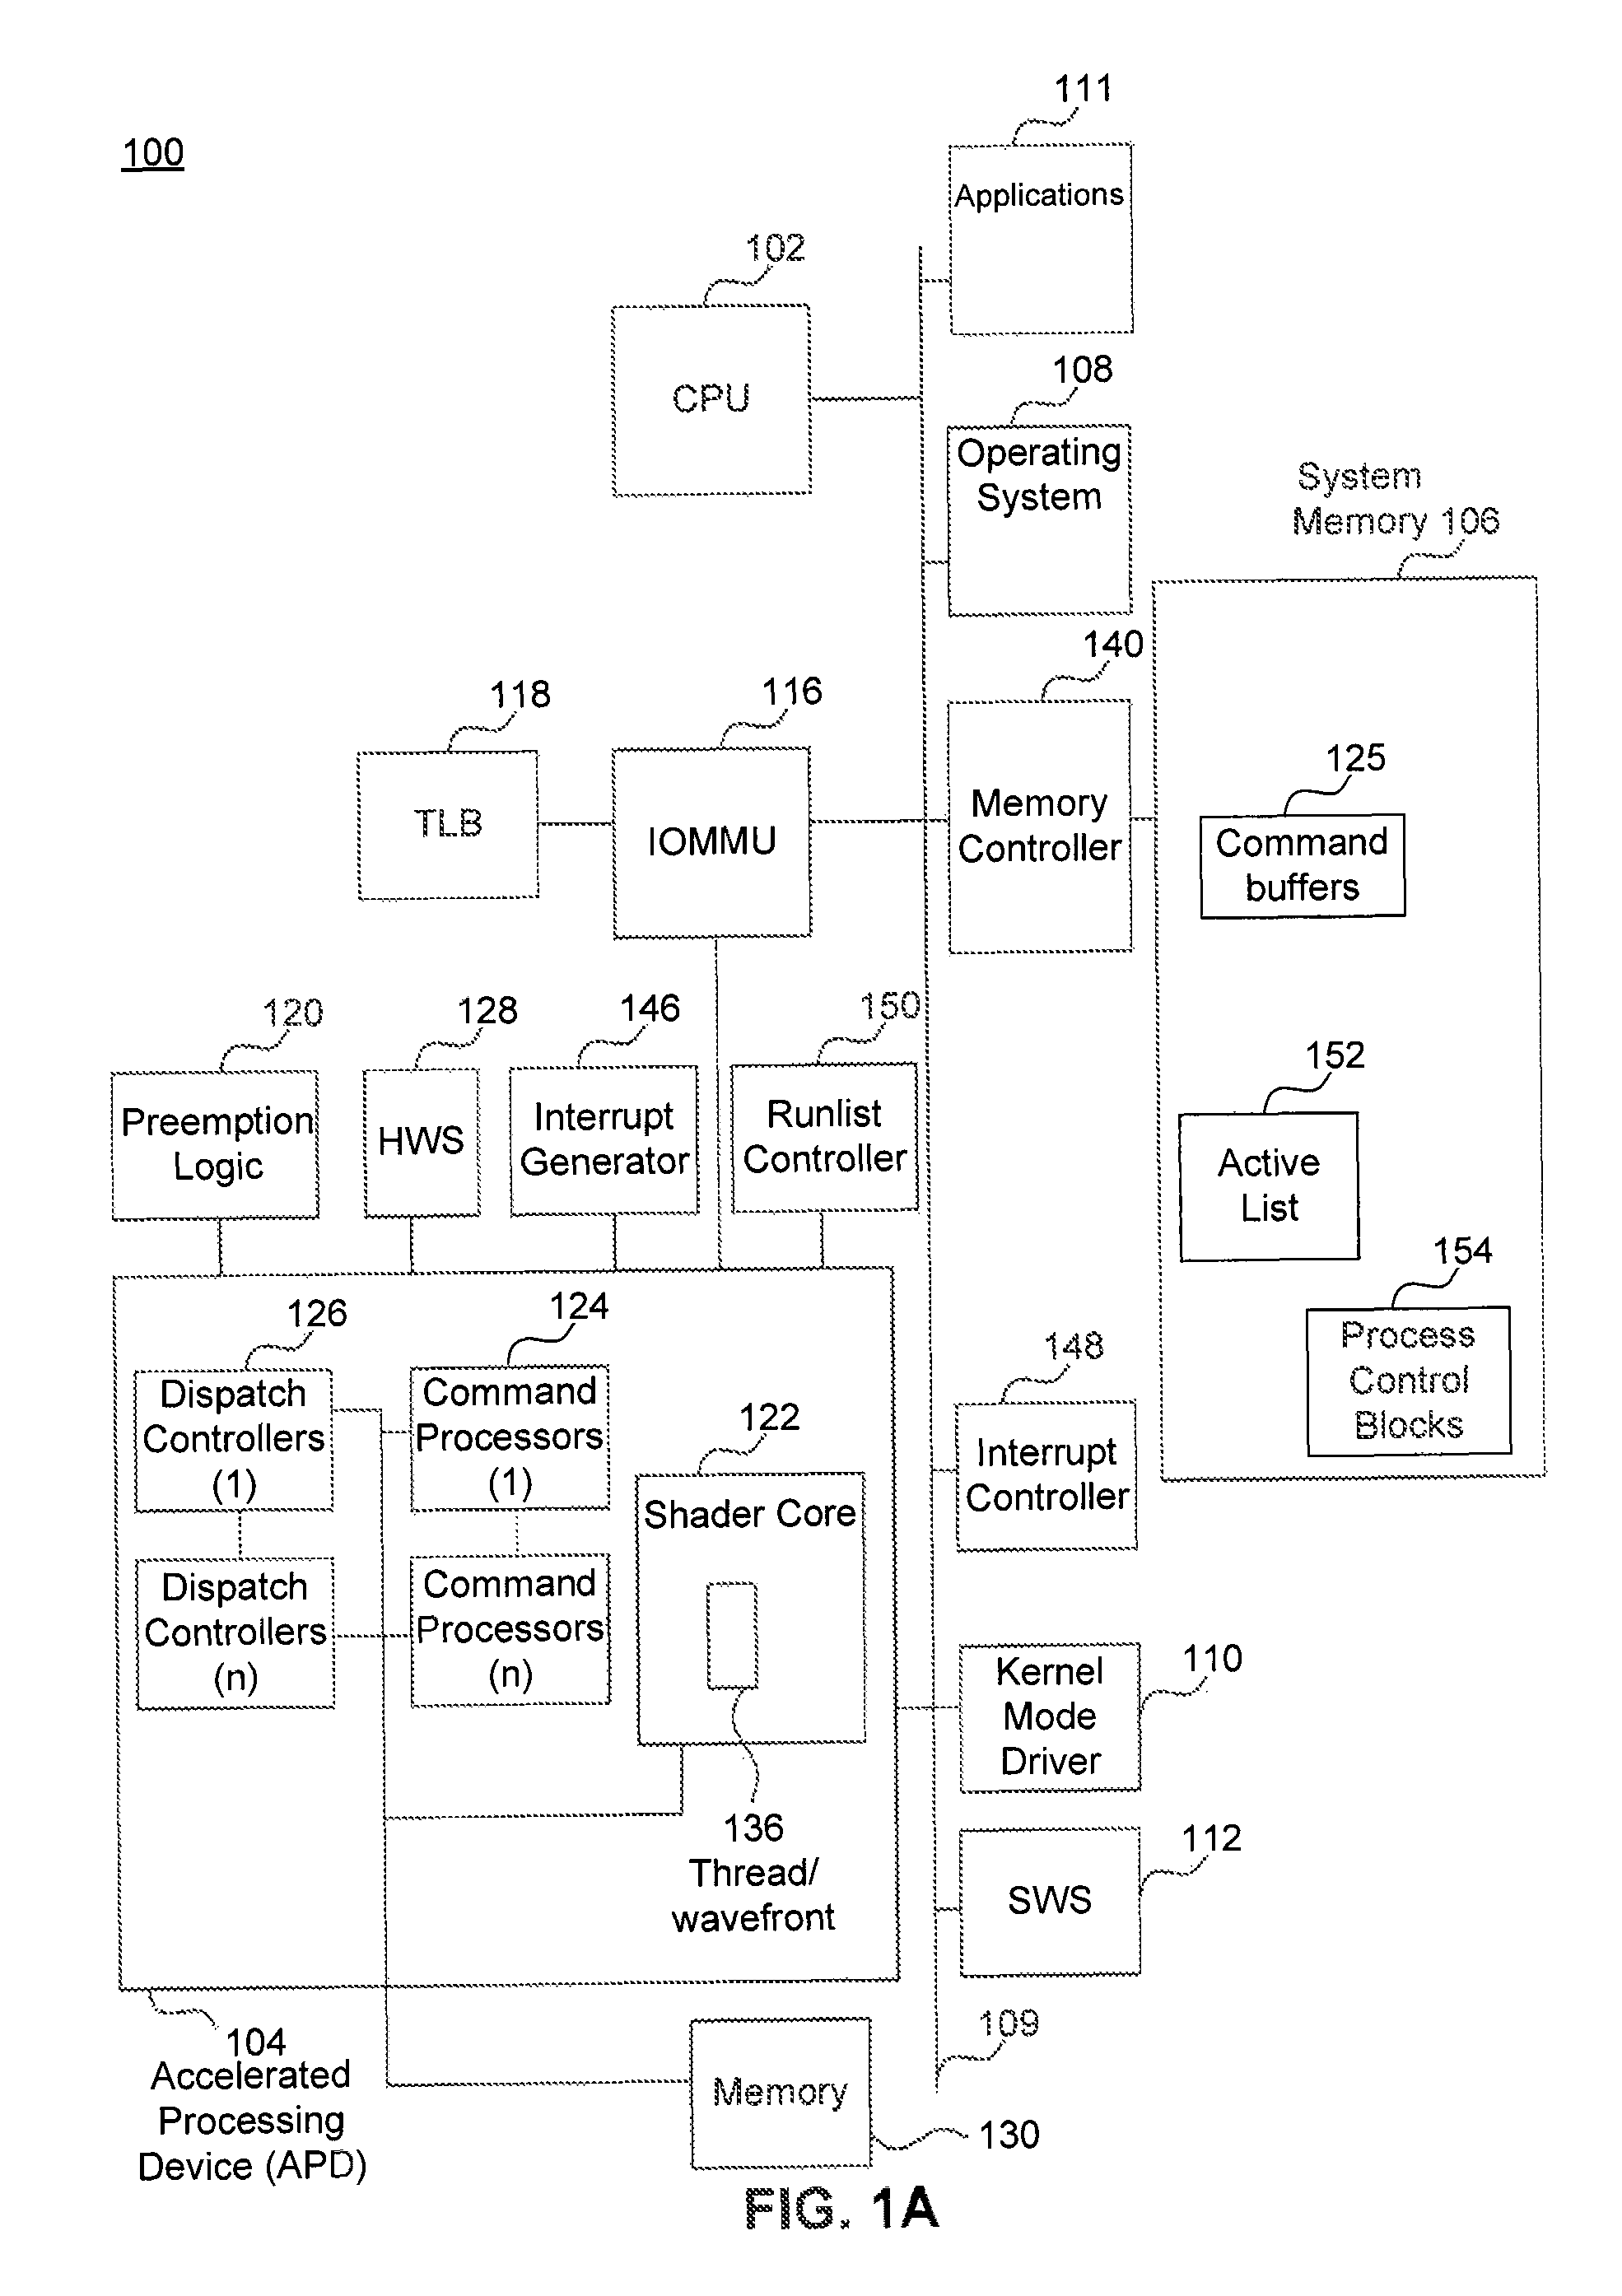 Device discovery and topology reporting in a combined CPU/GPU architecture system